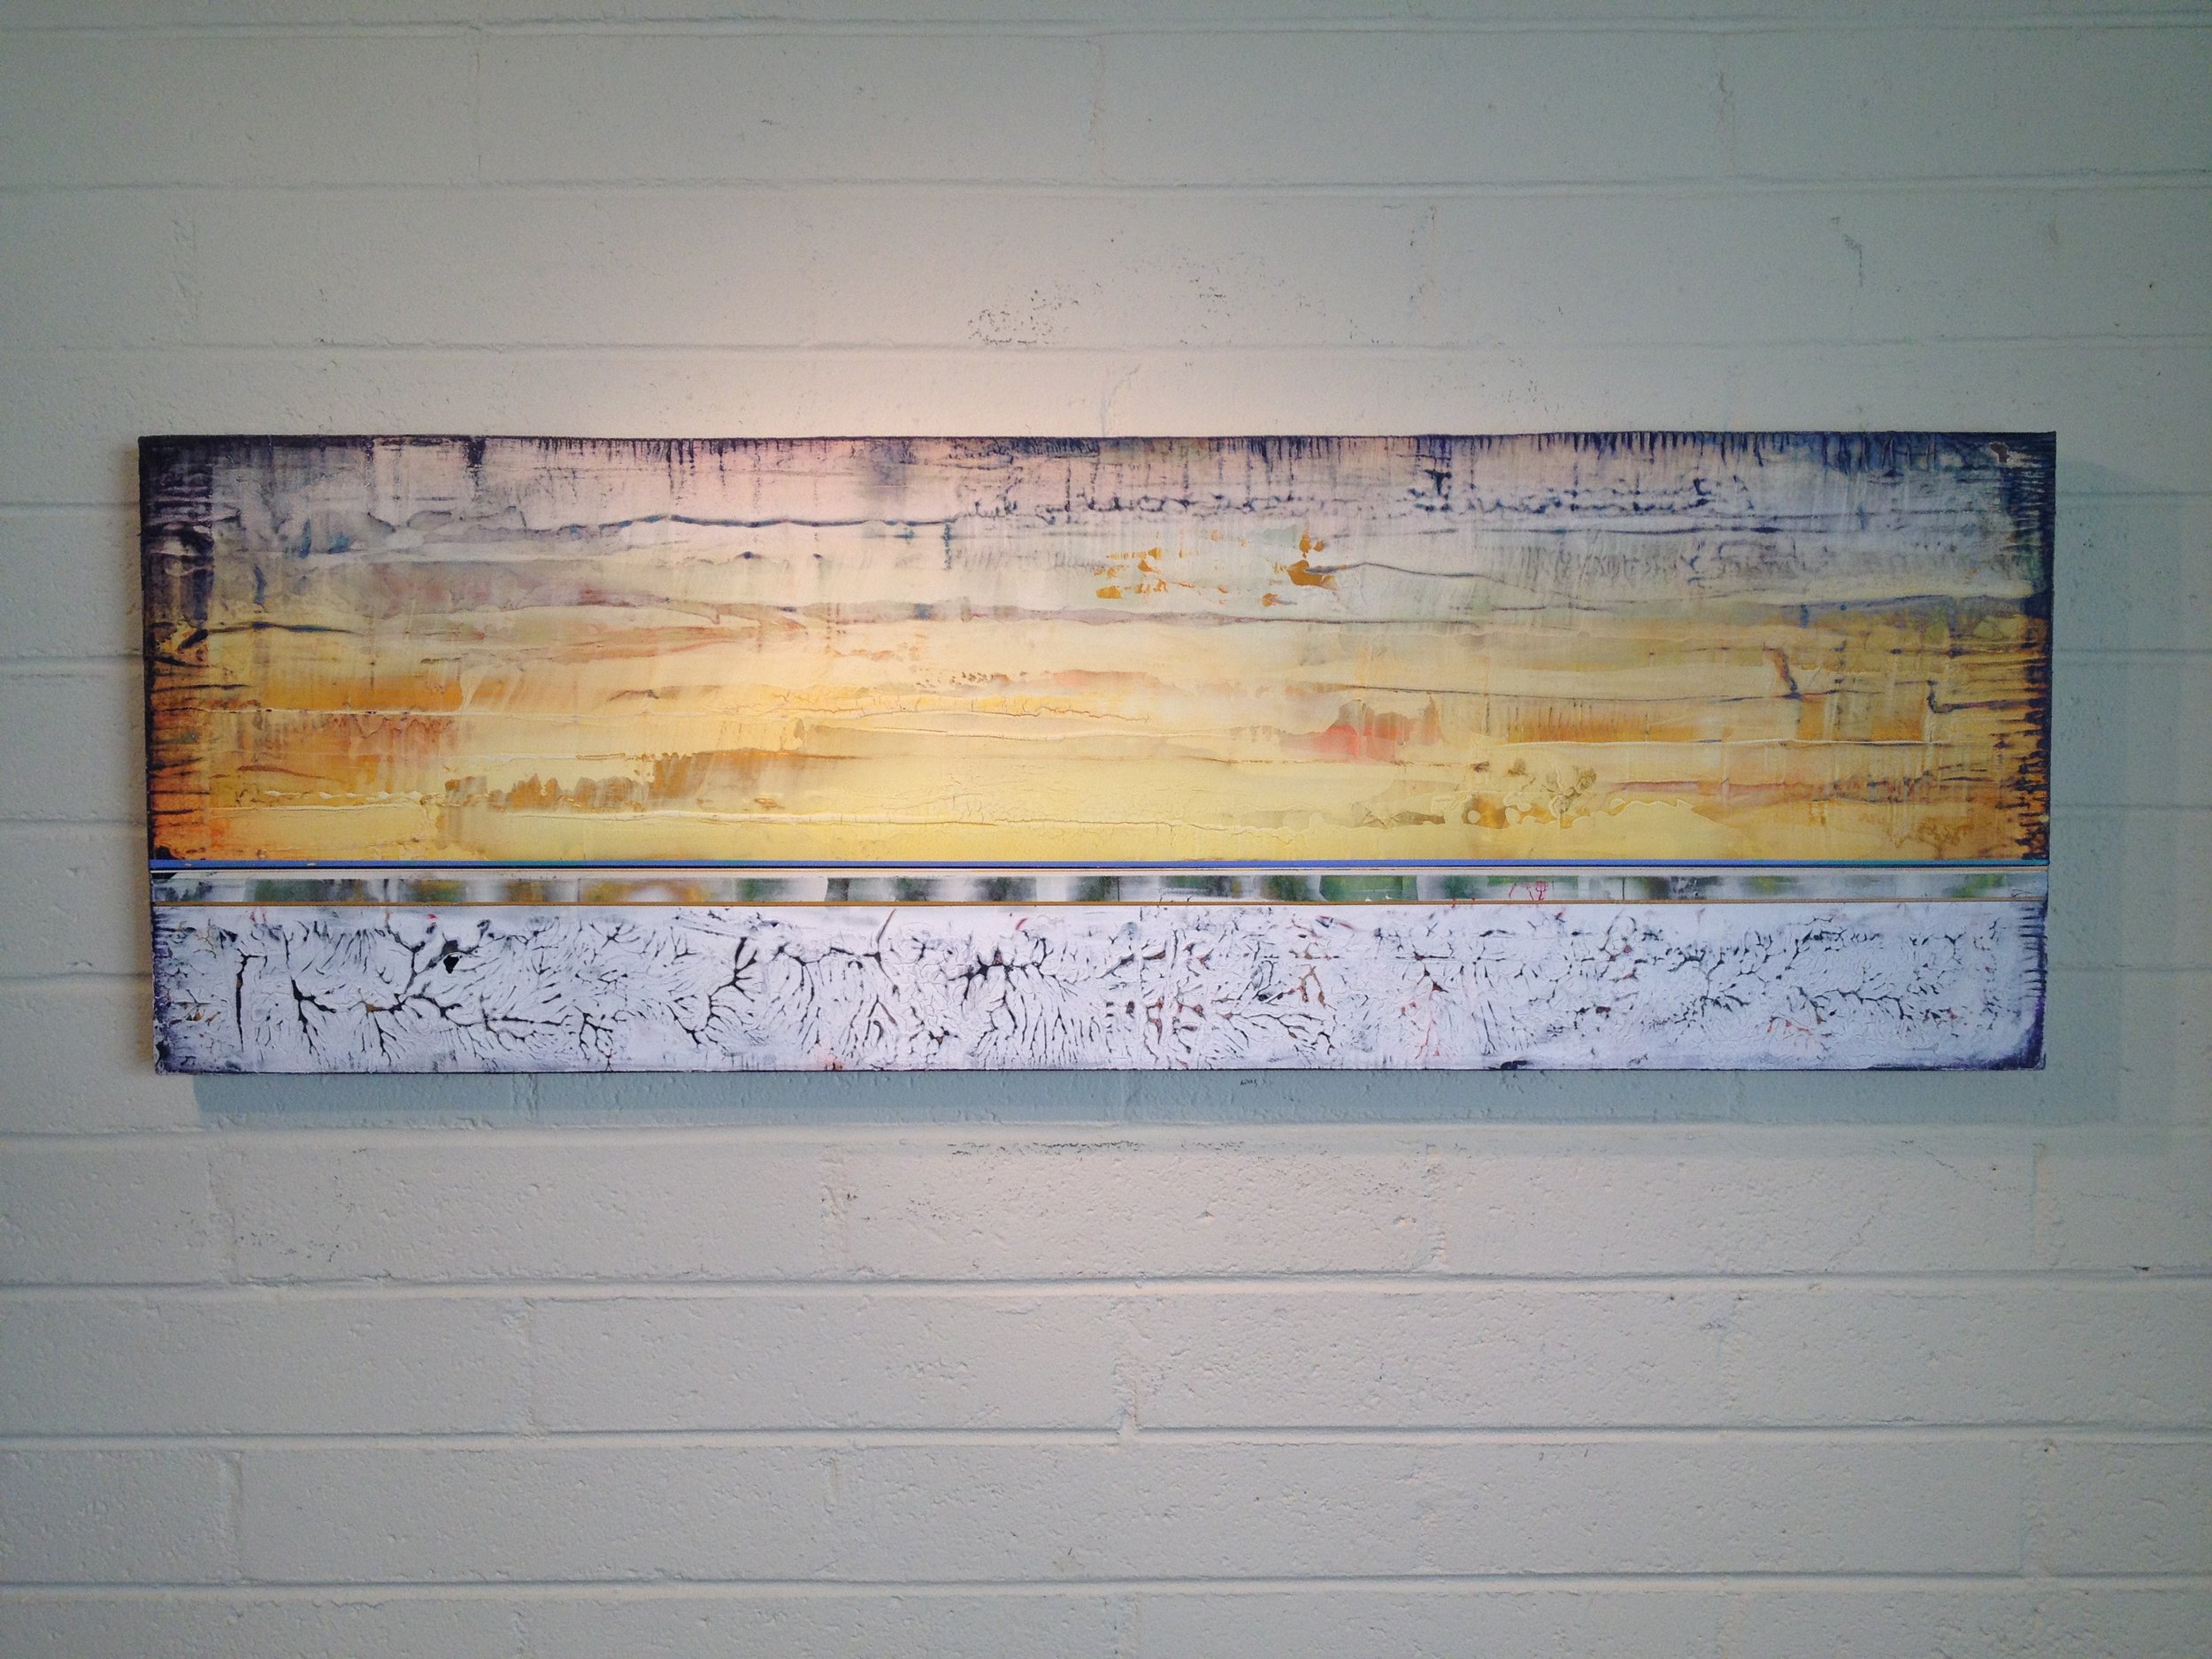  "ABIQUIU SUNRISE", 2014, 18"x 36", on wood. In private collection 